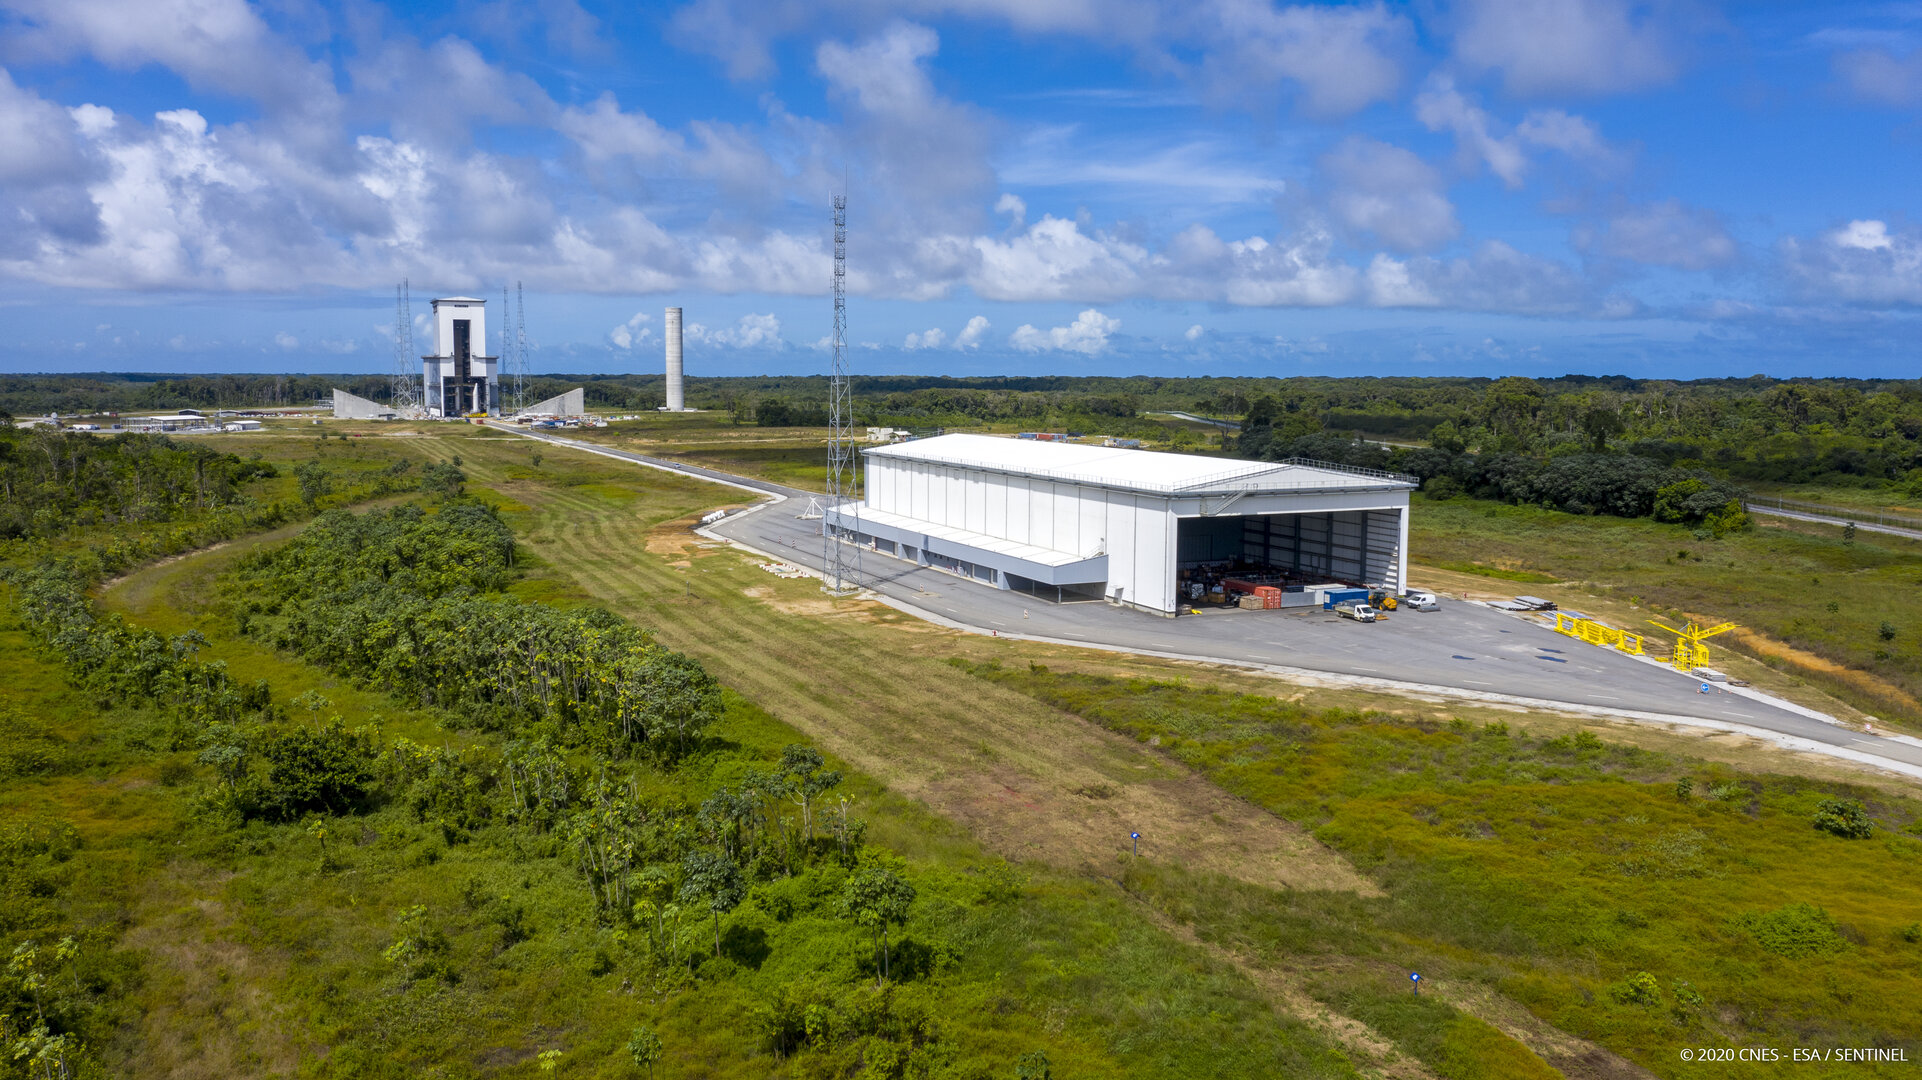 Ariane 6 assembly building